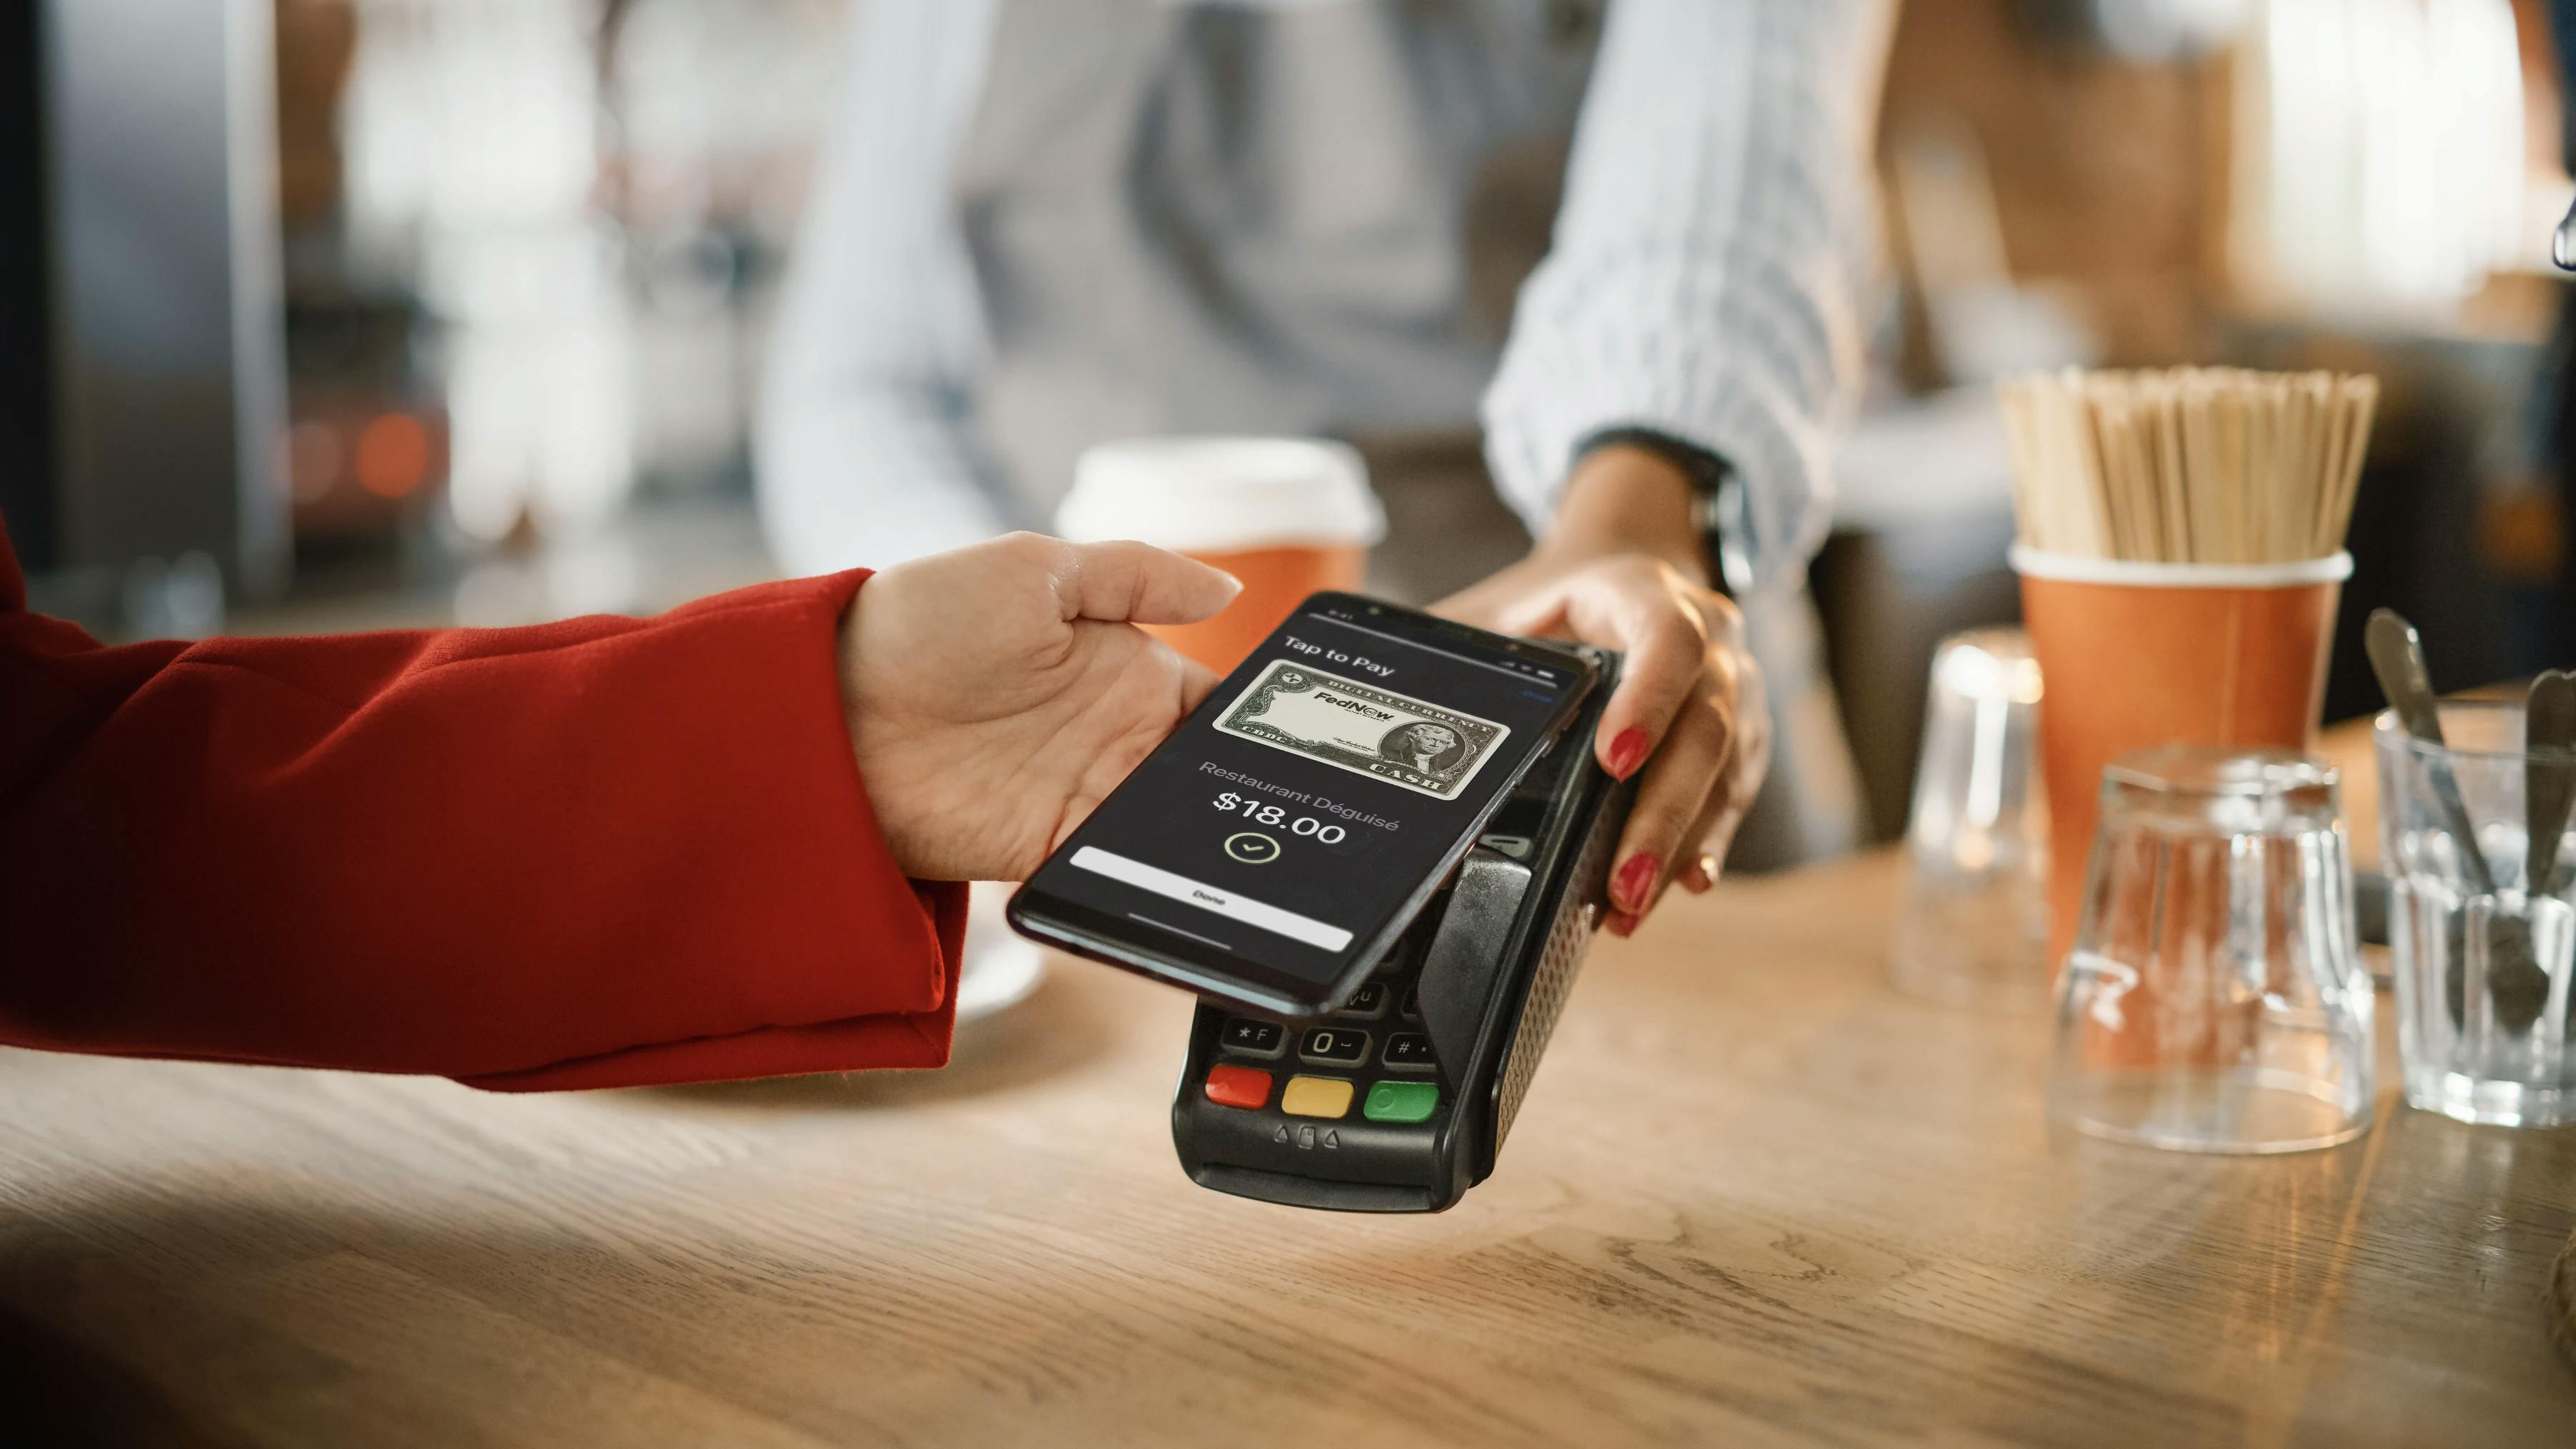 Paying with Card+ Cash, via a SmartPhone